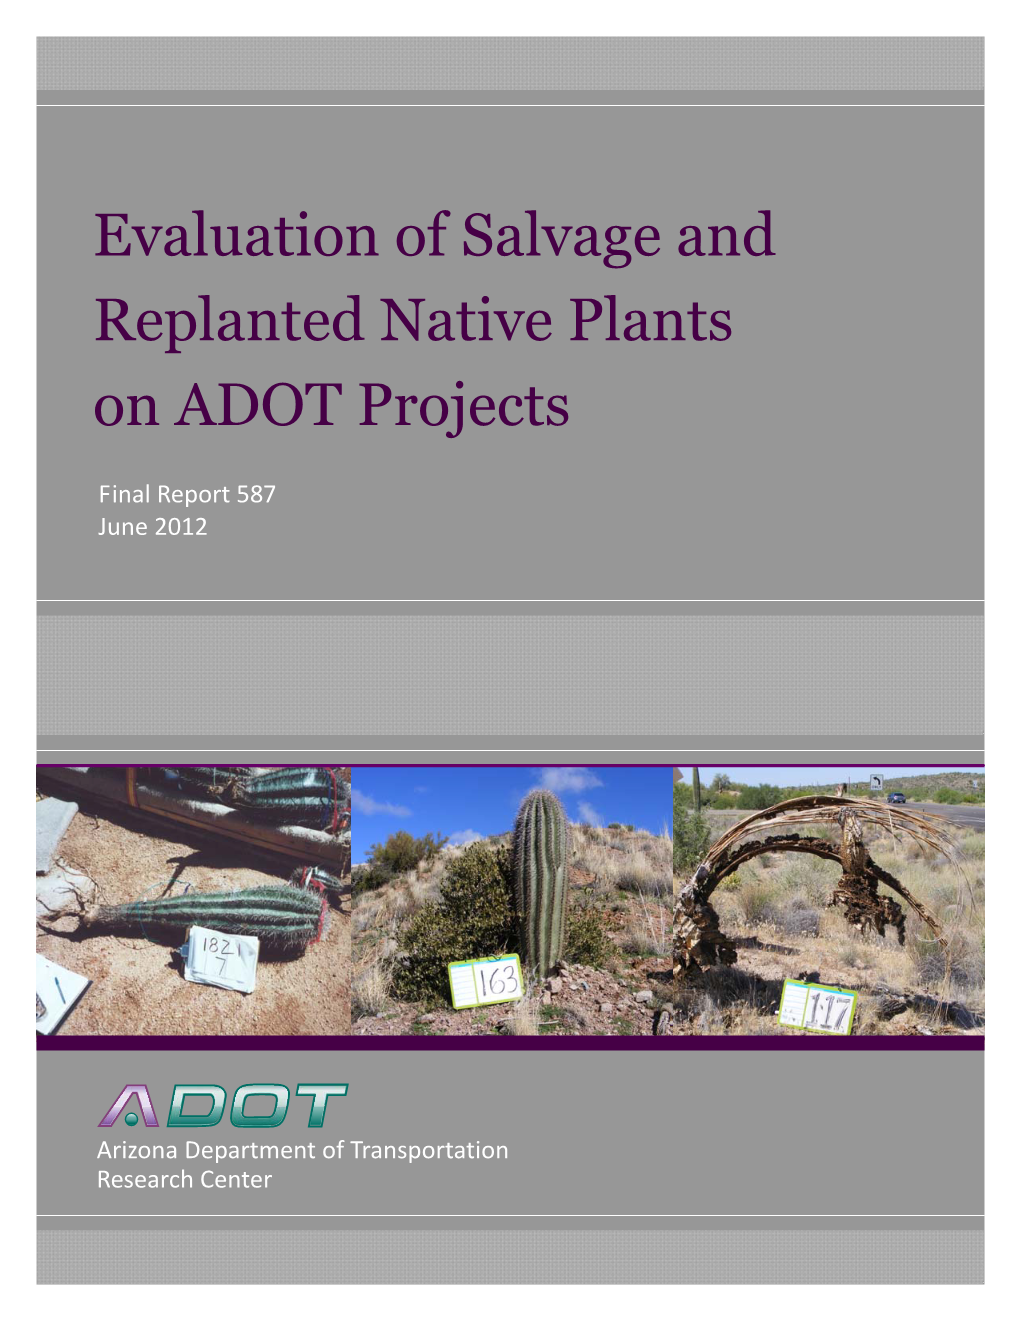 Evaluation of Salvage and Replanted Native Plants on ADOT Projects